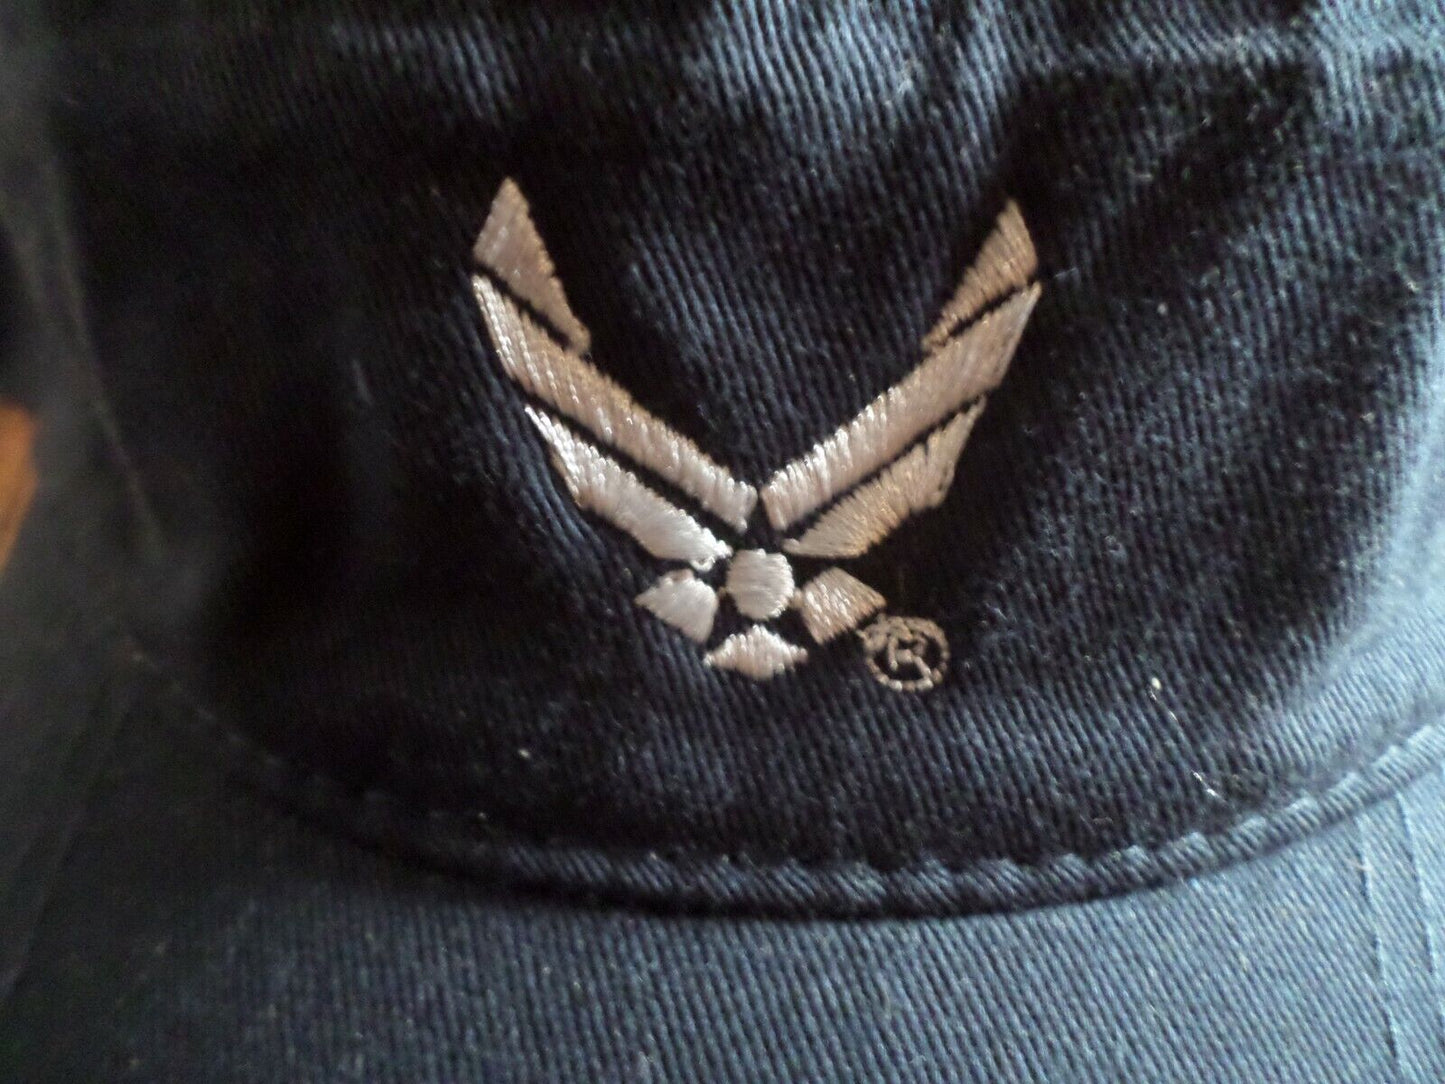 U.S AIR FORCE SUN VISOR CAP BLUE HAT WITH EMBROIDERED AIR FORCE WINGS LOGO